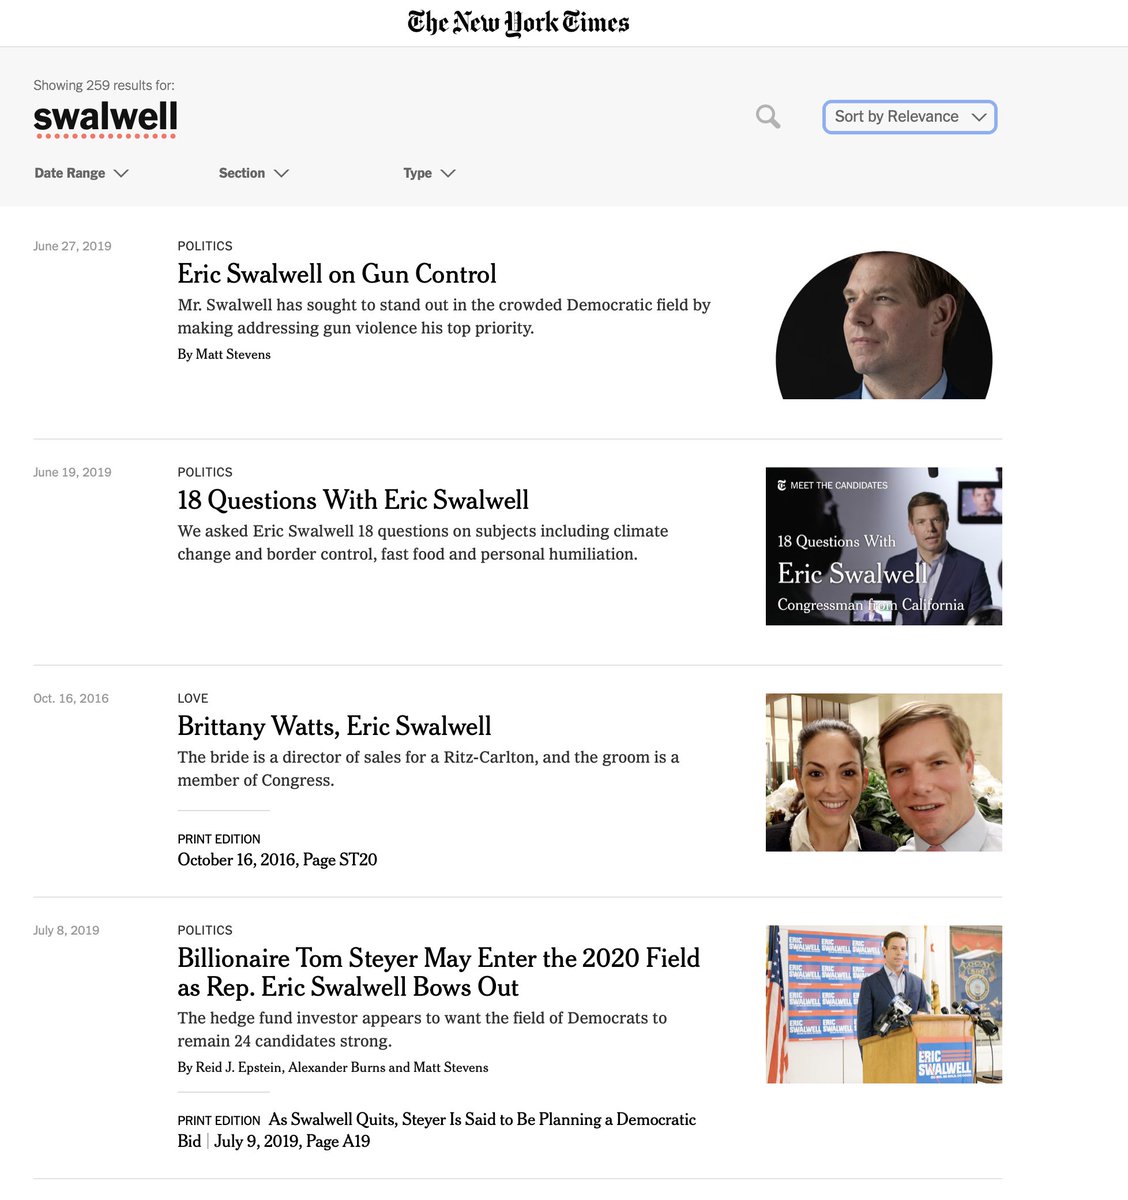 @AriFleischer @TookiBear I just searched for Swalwell and saw👇